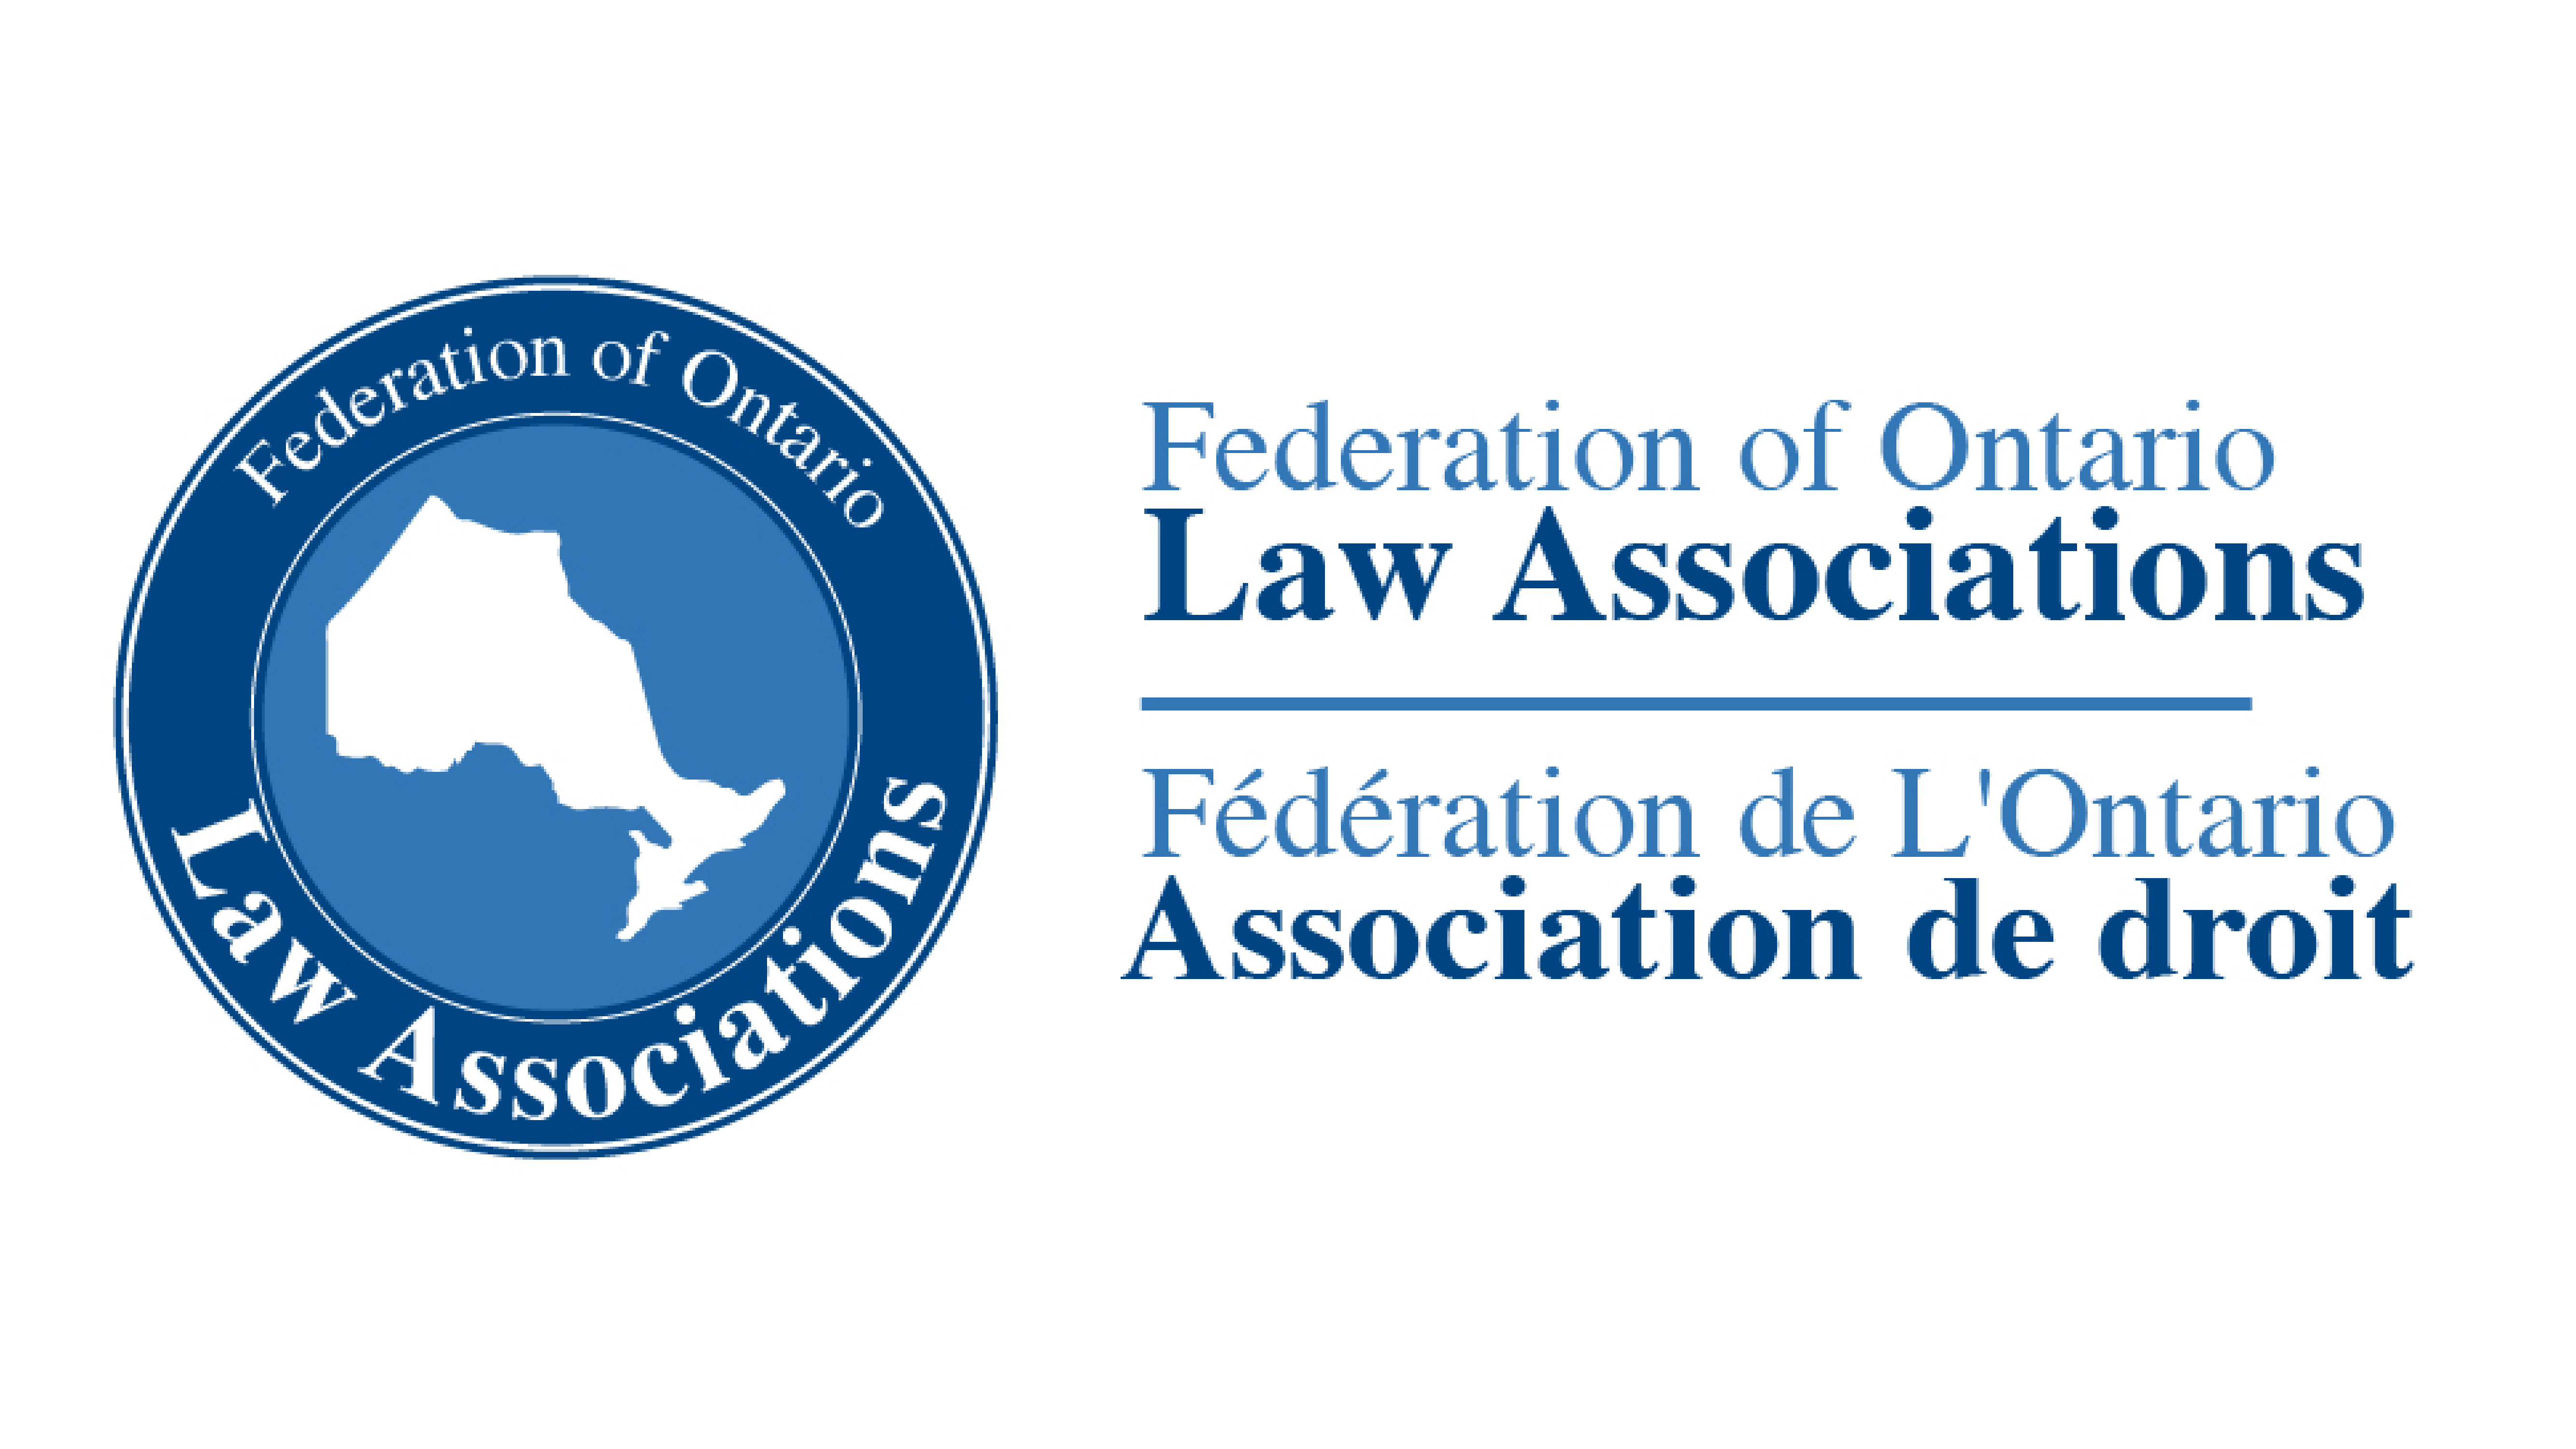 Law Association - Federal of Ontario